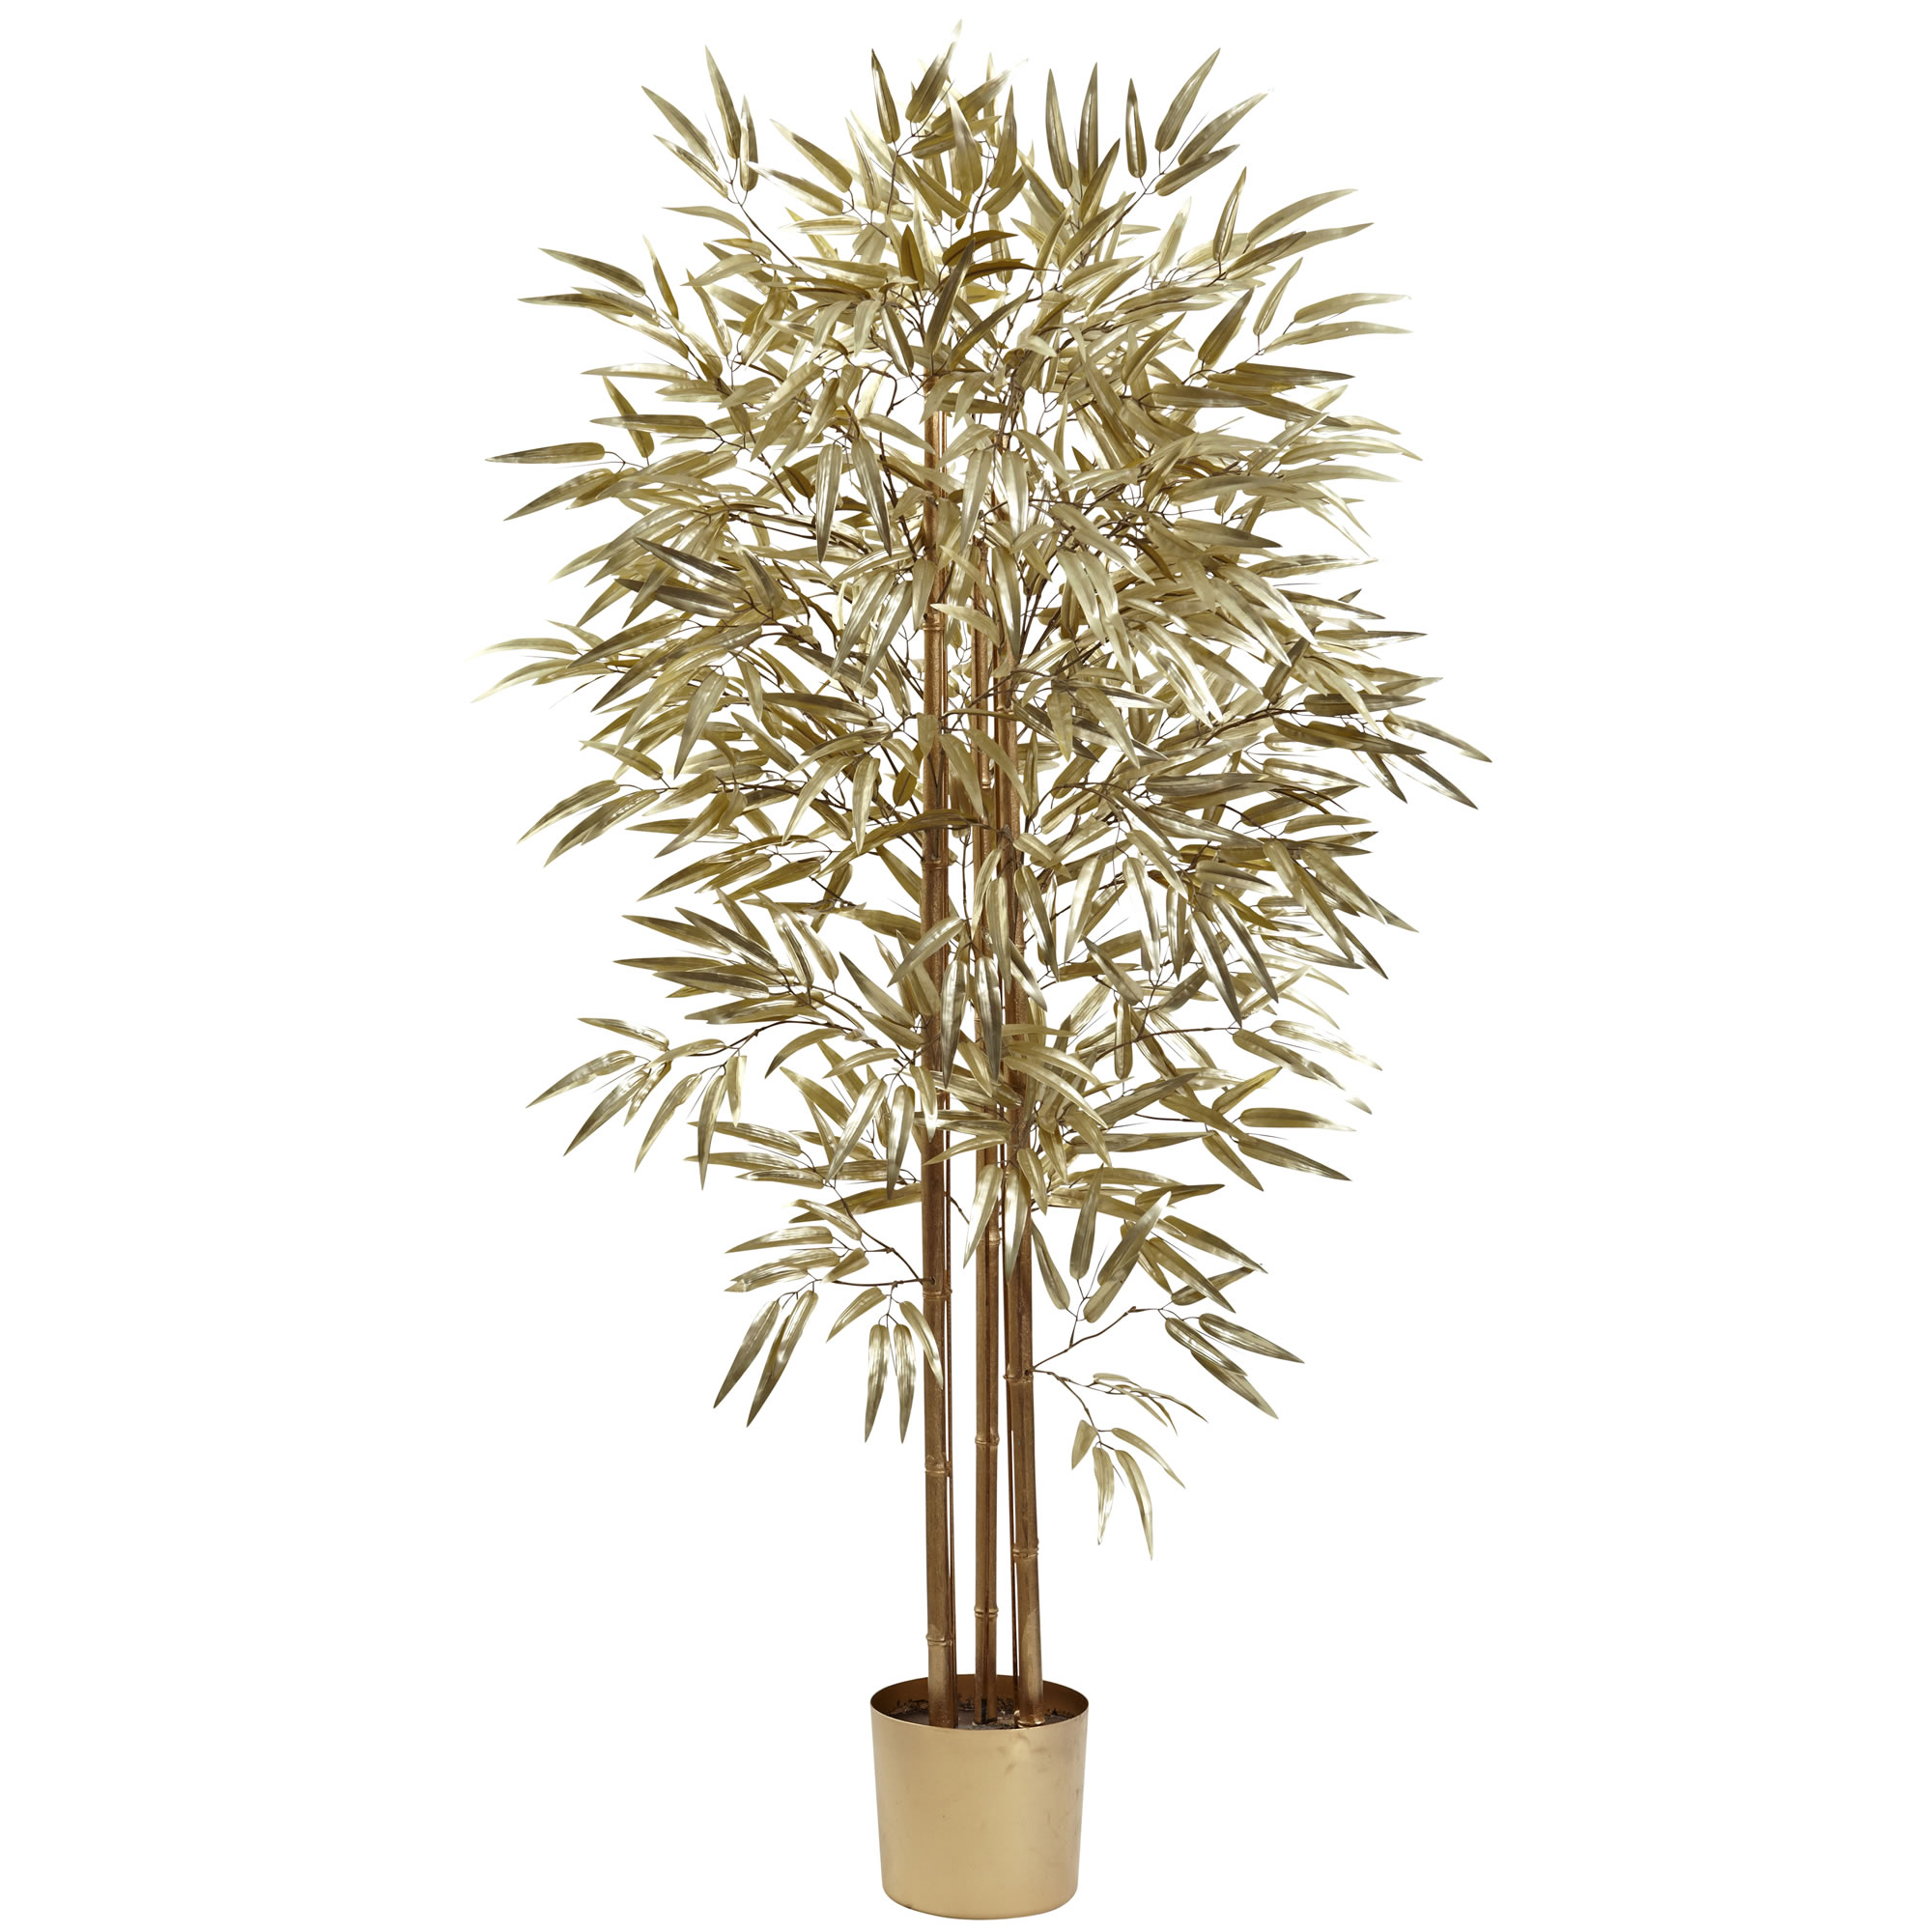 5' Golden Bamboo Tree w/880 Leaves